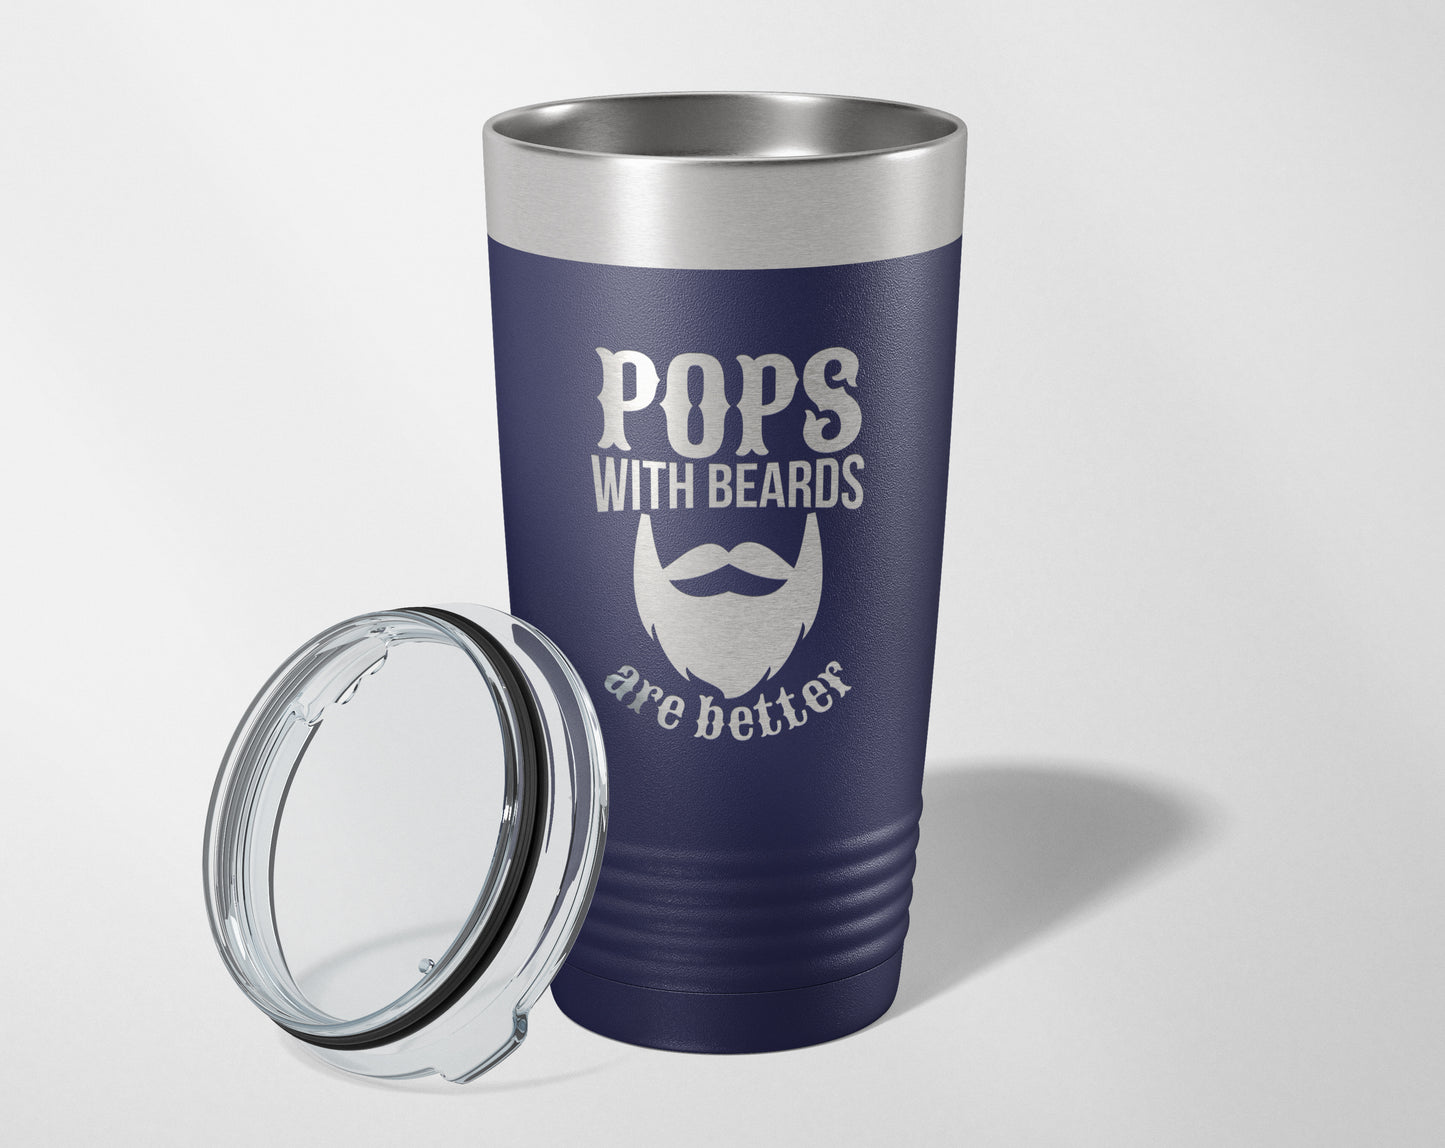 Yeti Tumbler 20 oz Navy Blue Deal! Engraved Grandpa and mustache